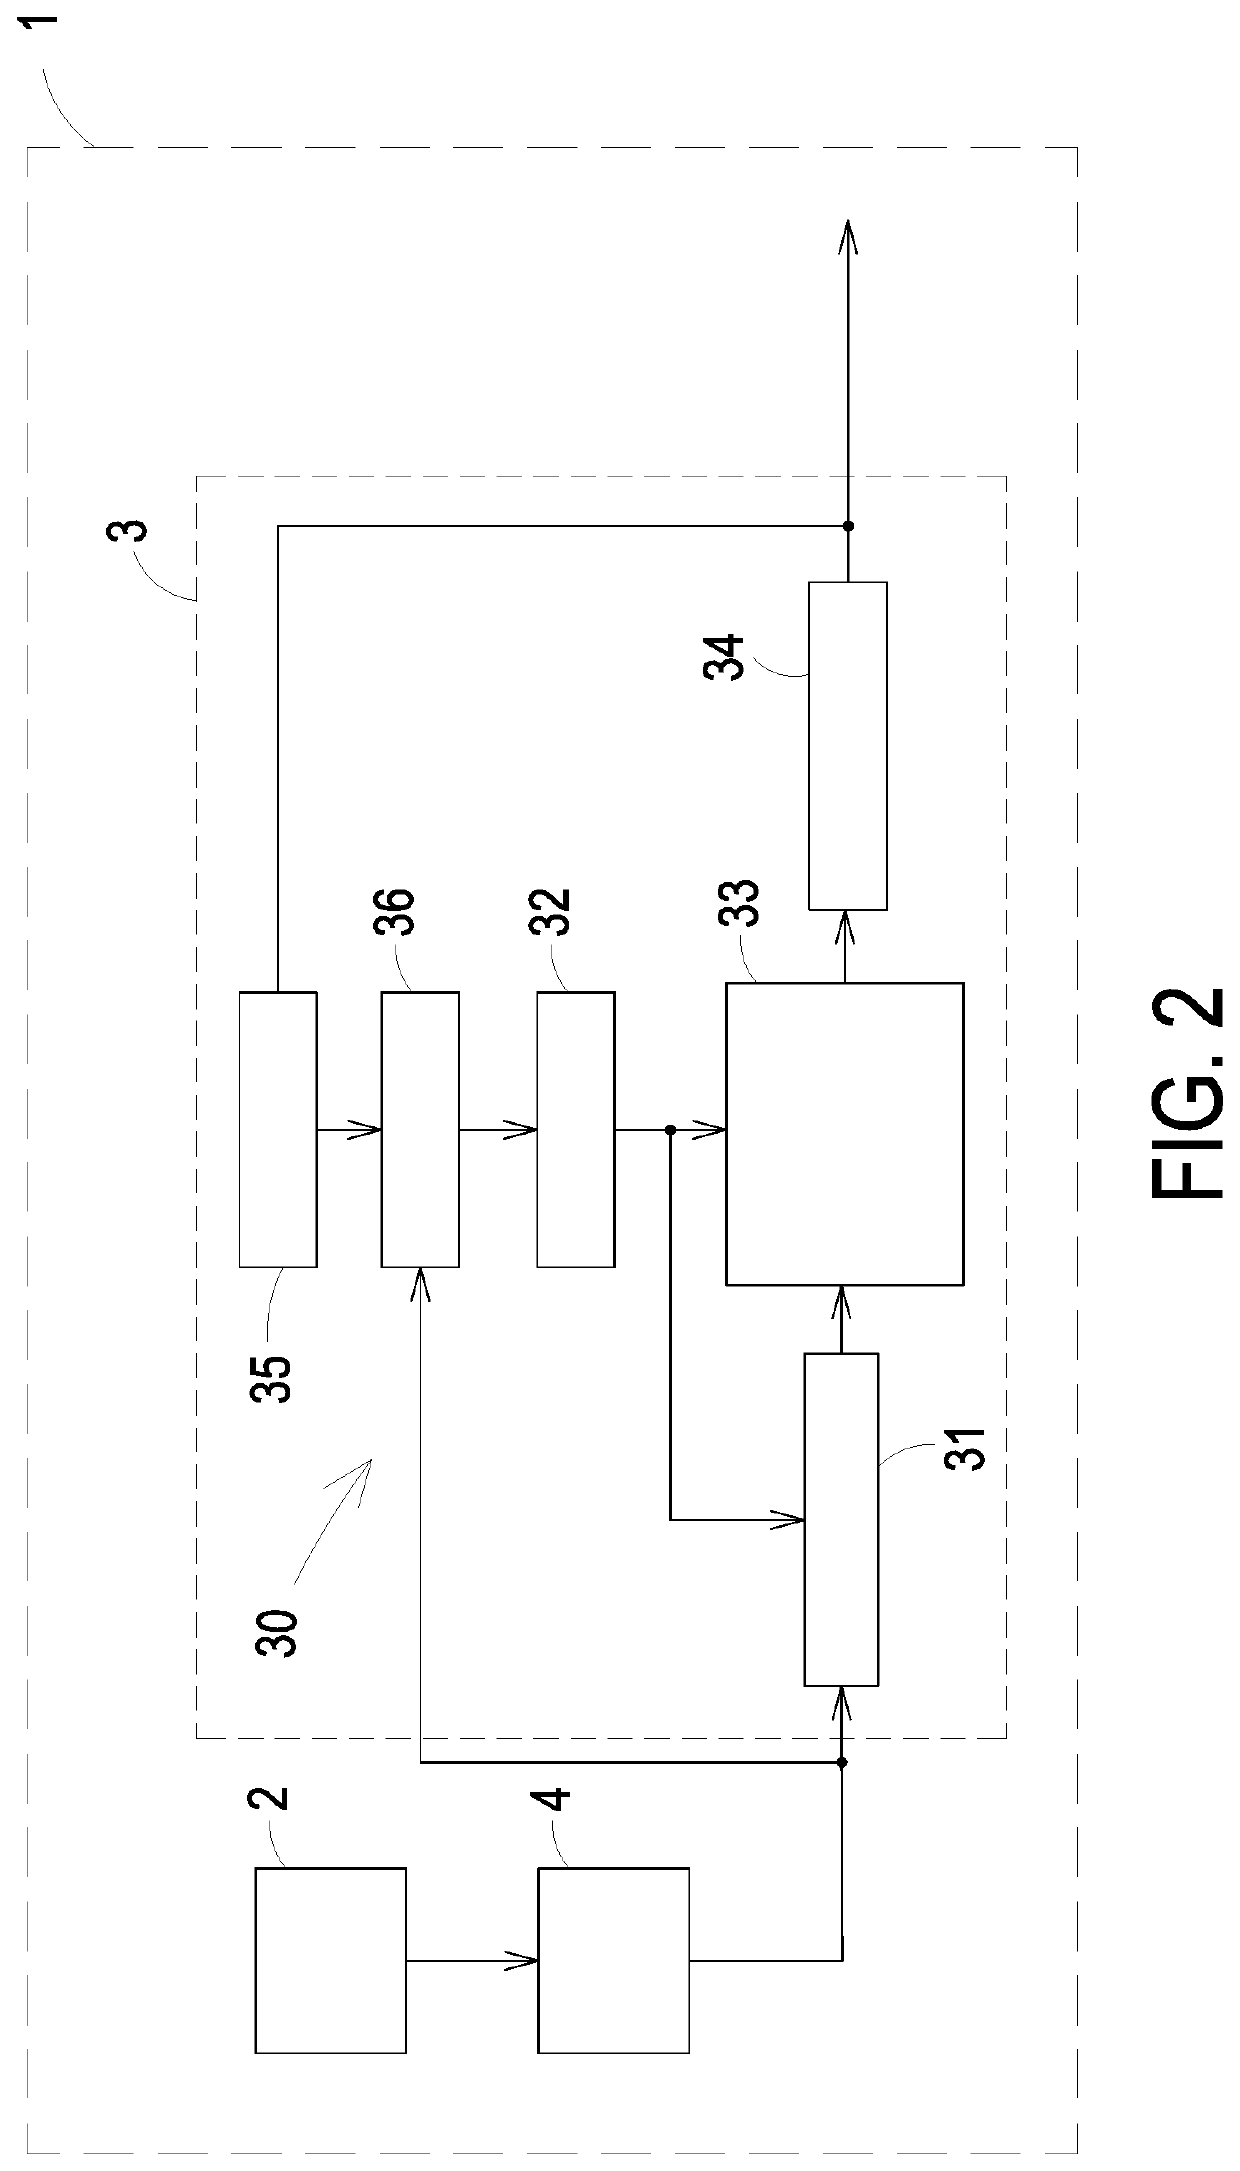 Correction control method of hidden switch with fuzzy inference system